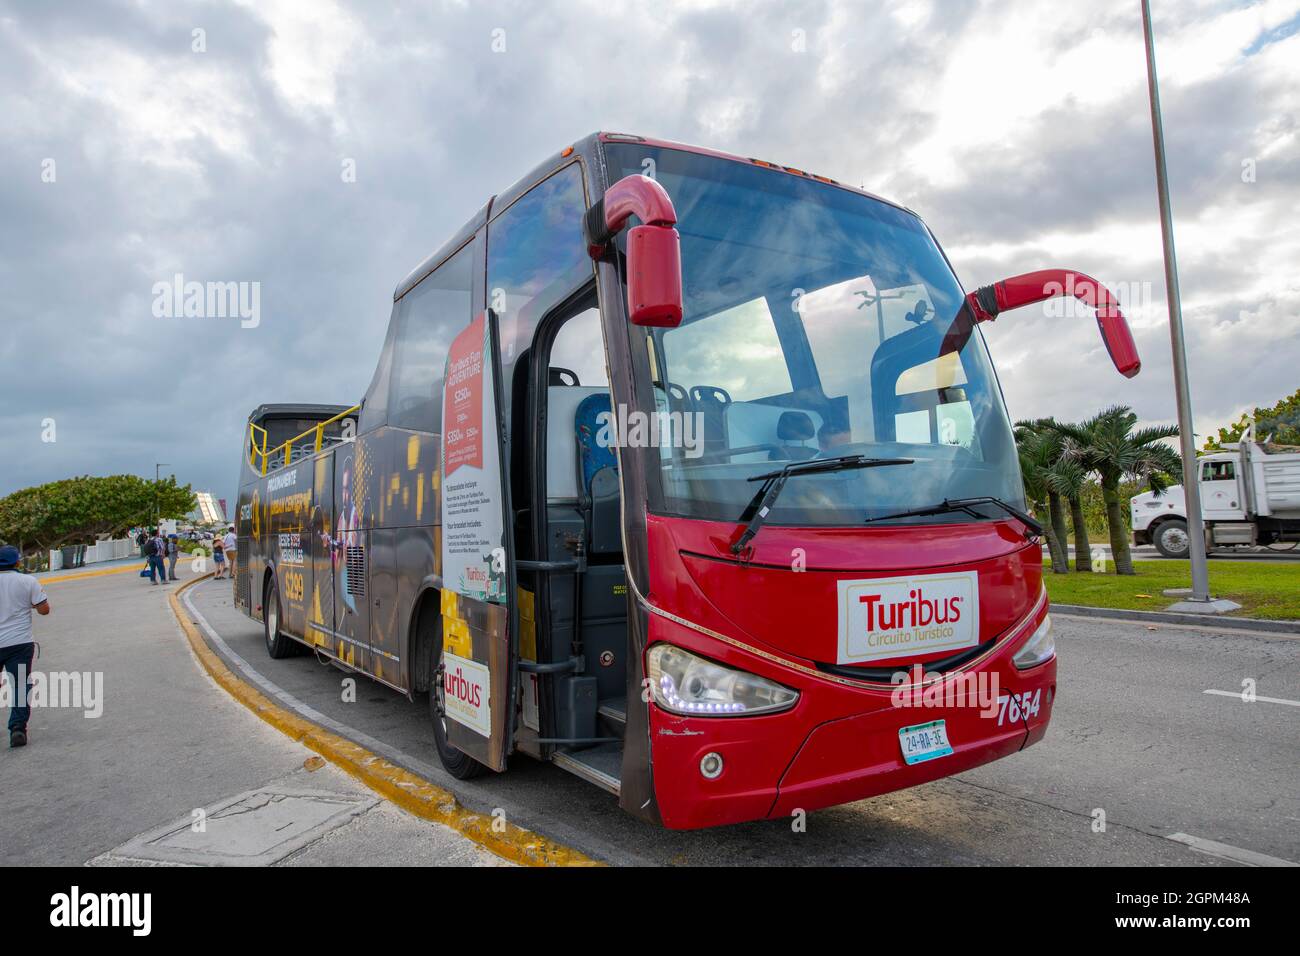 Double deck tour bus Turibus on Cancun hotel zone in city of Cancun, Quintana Roo QR, Mexico. Stock Photo